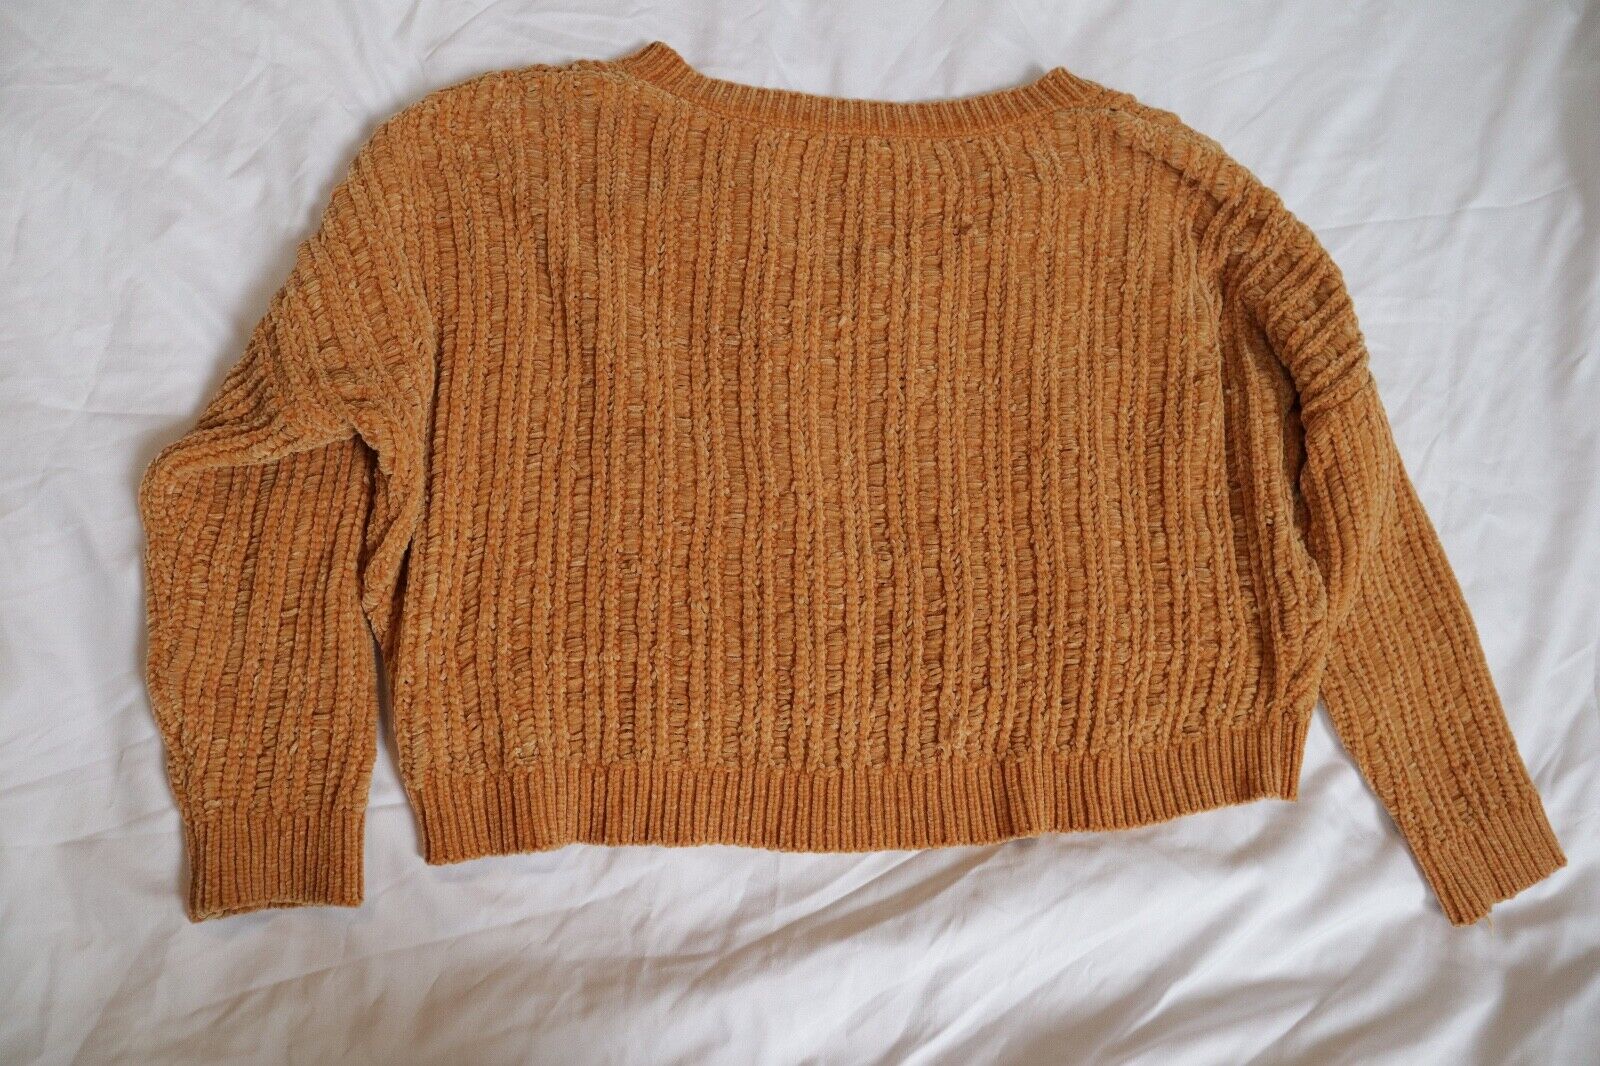 Wild Fable Orange Soft Knit Sweater Size S Croppe… - image 6